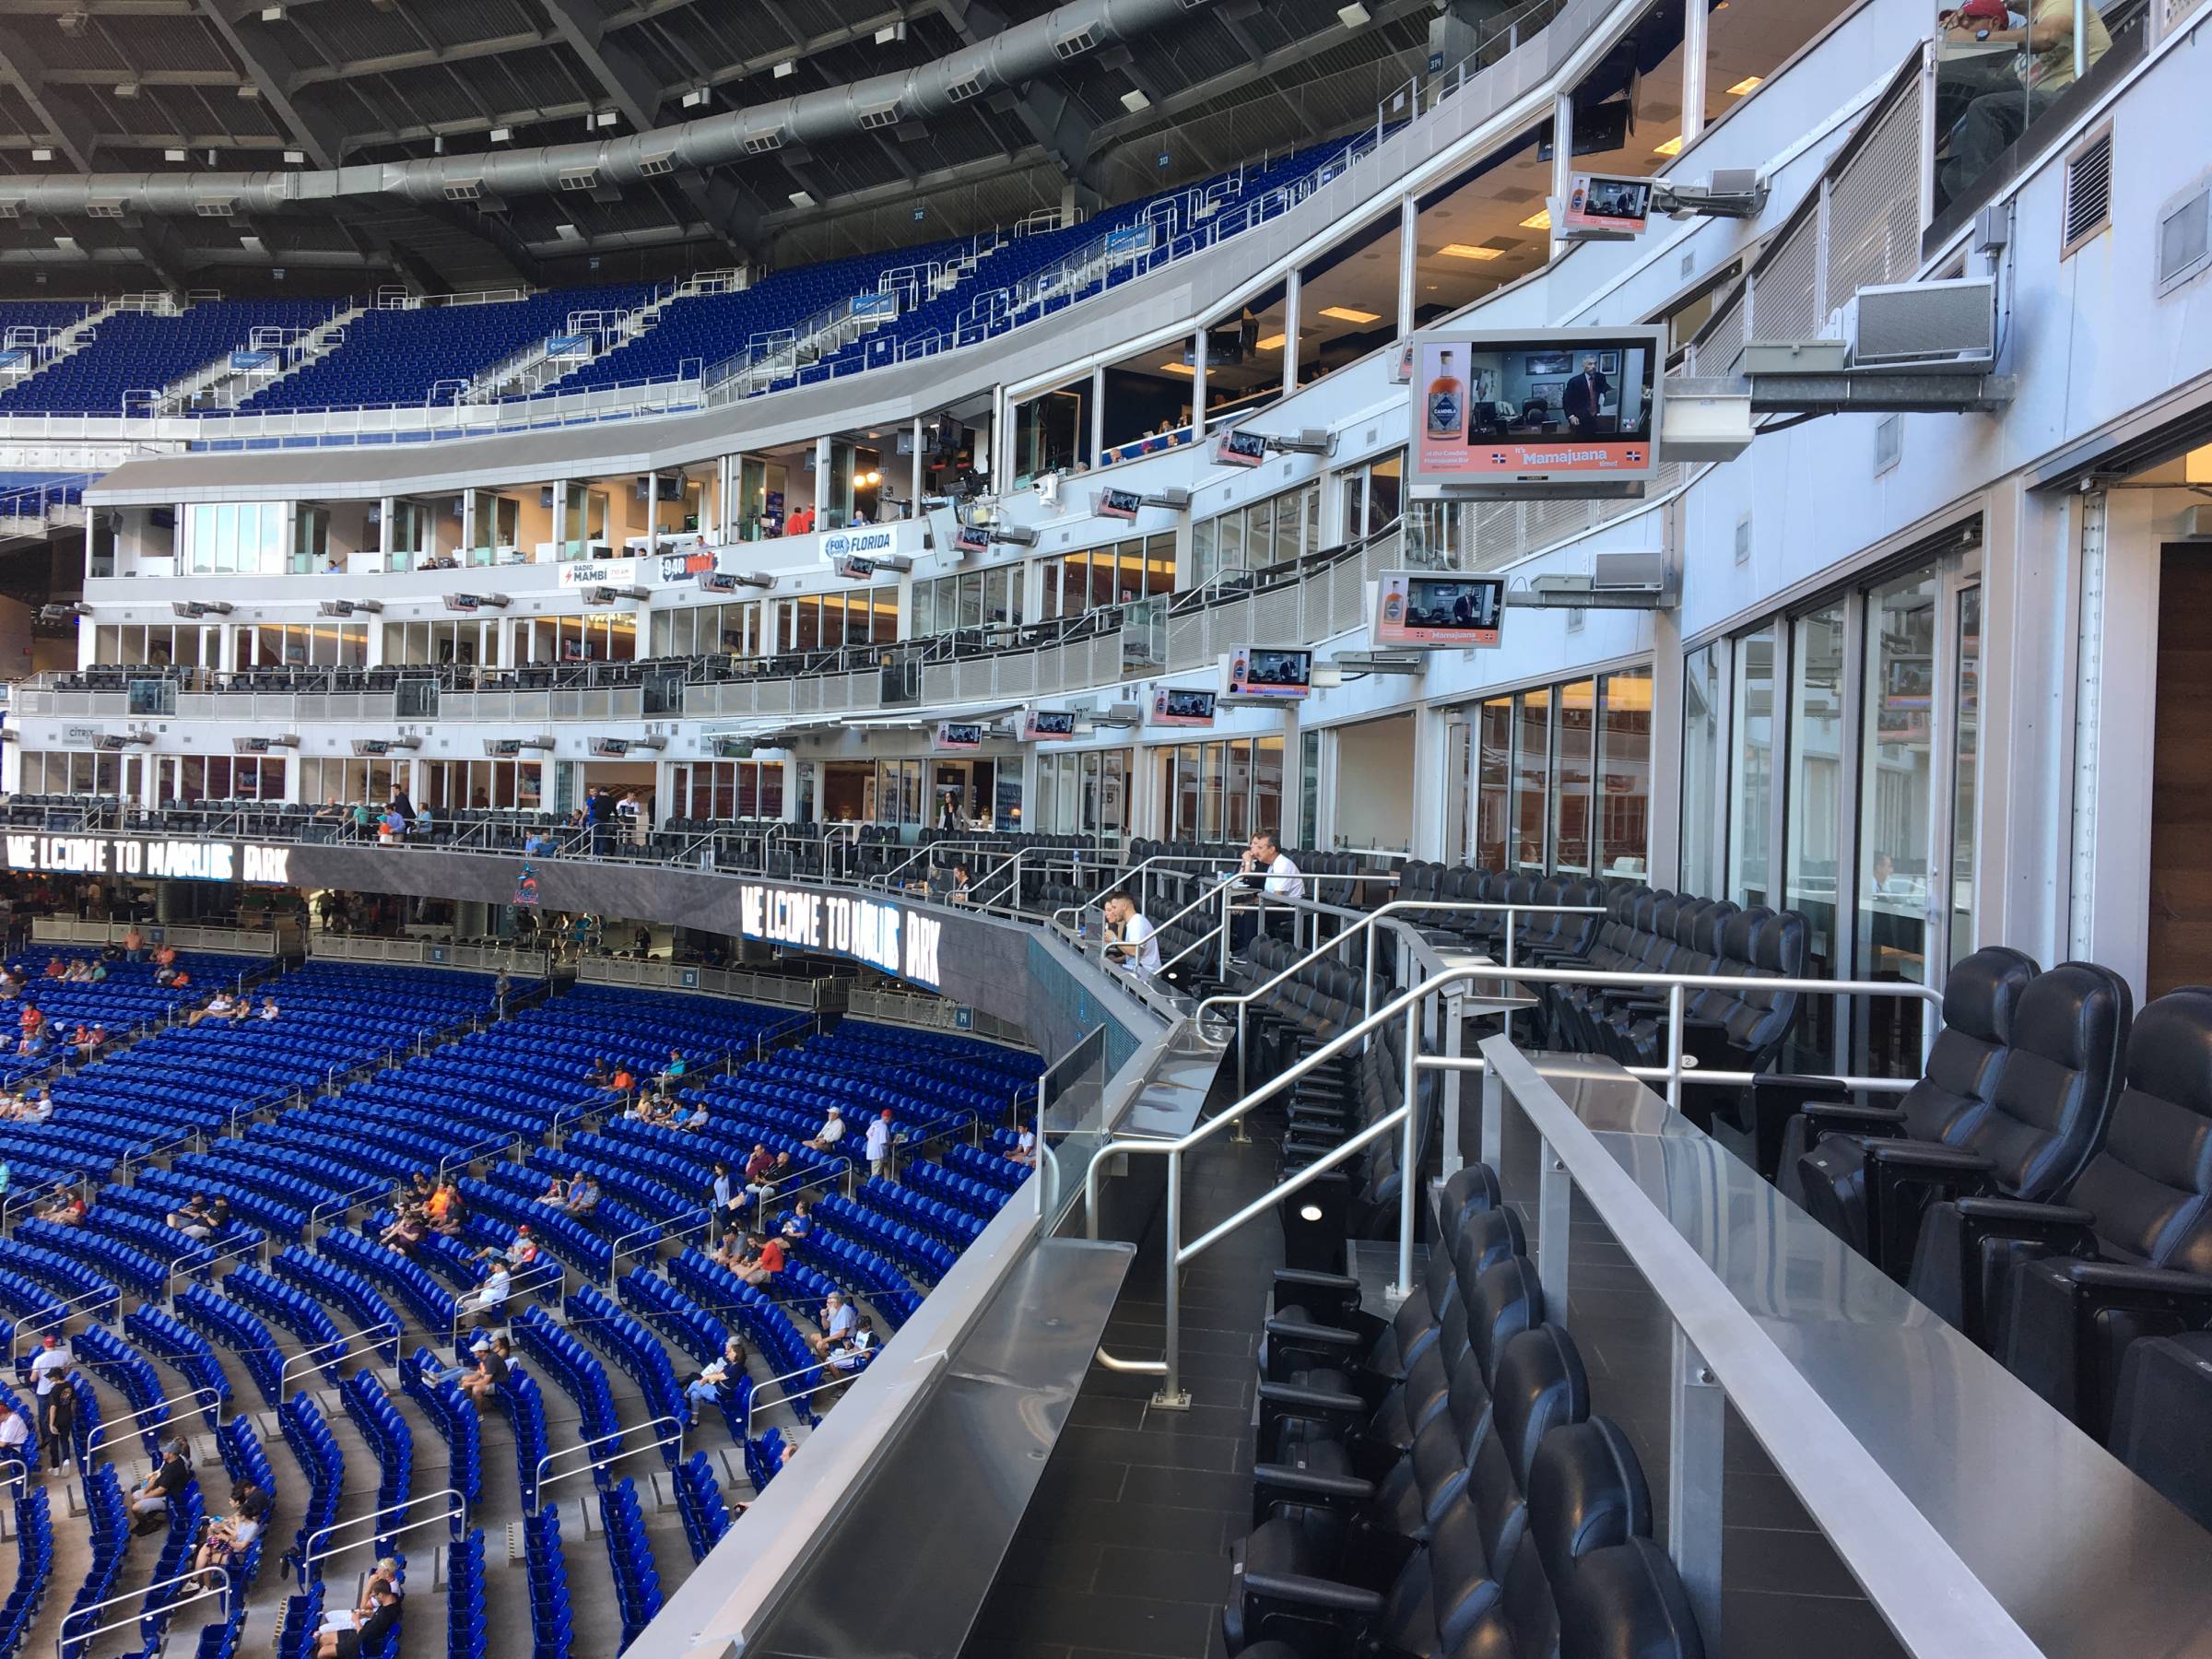 View of suites at Marlins Park